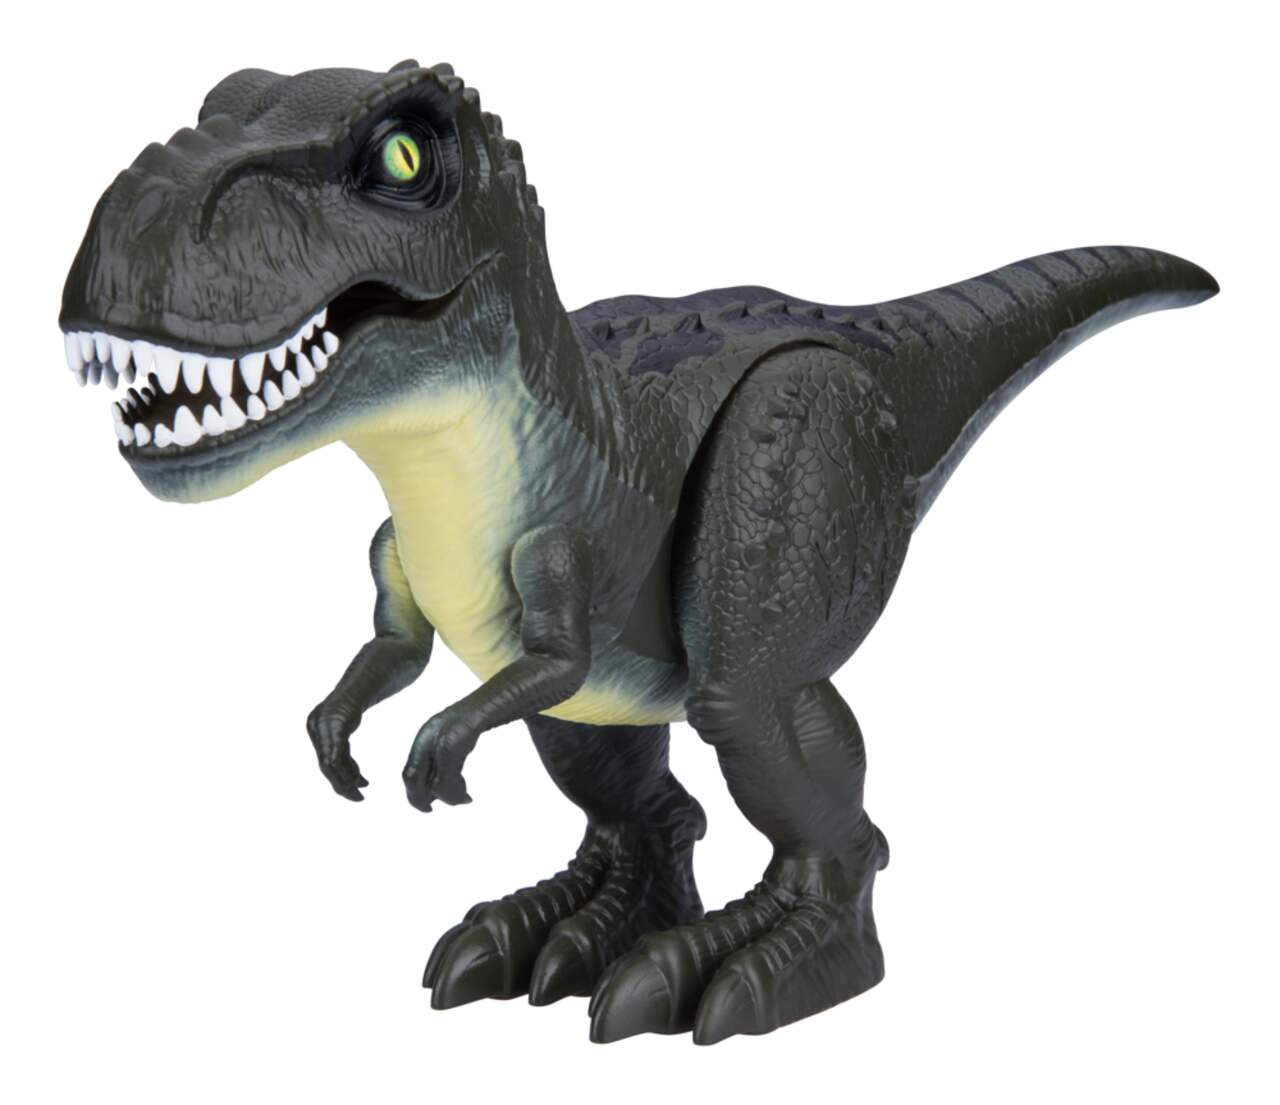 Riding dinosaur, robot top hot holiday toy list